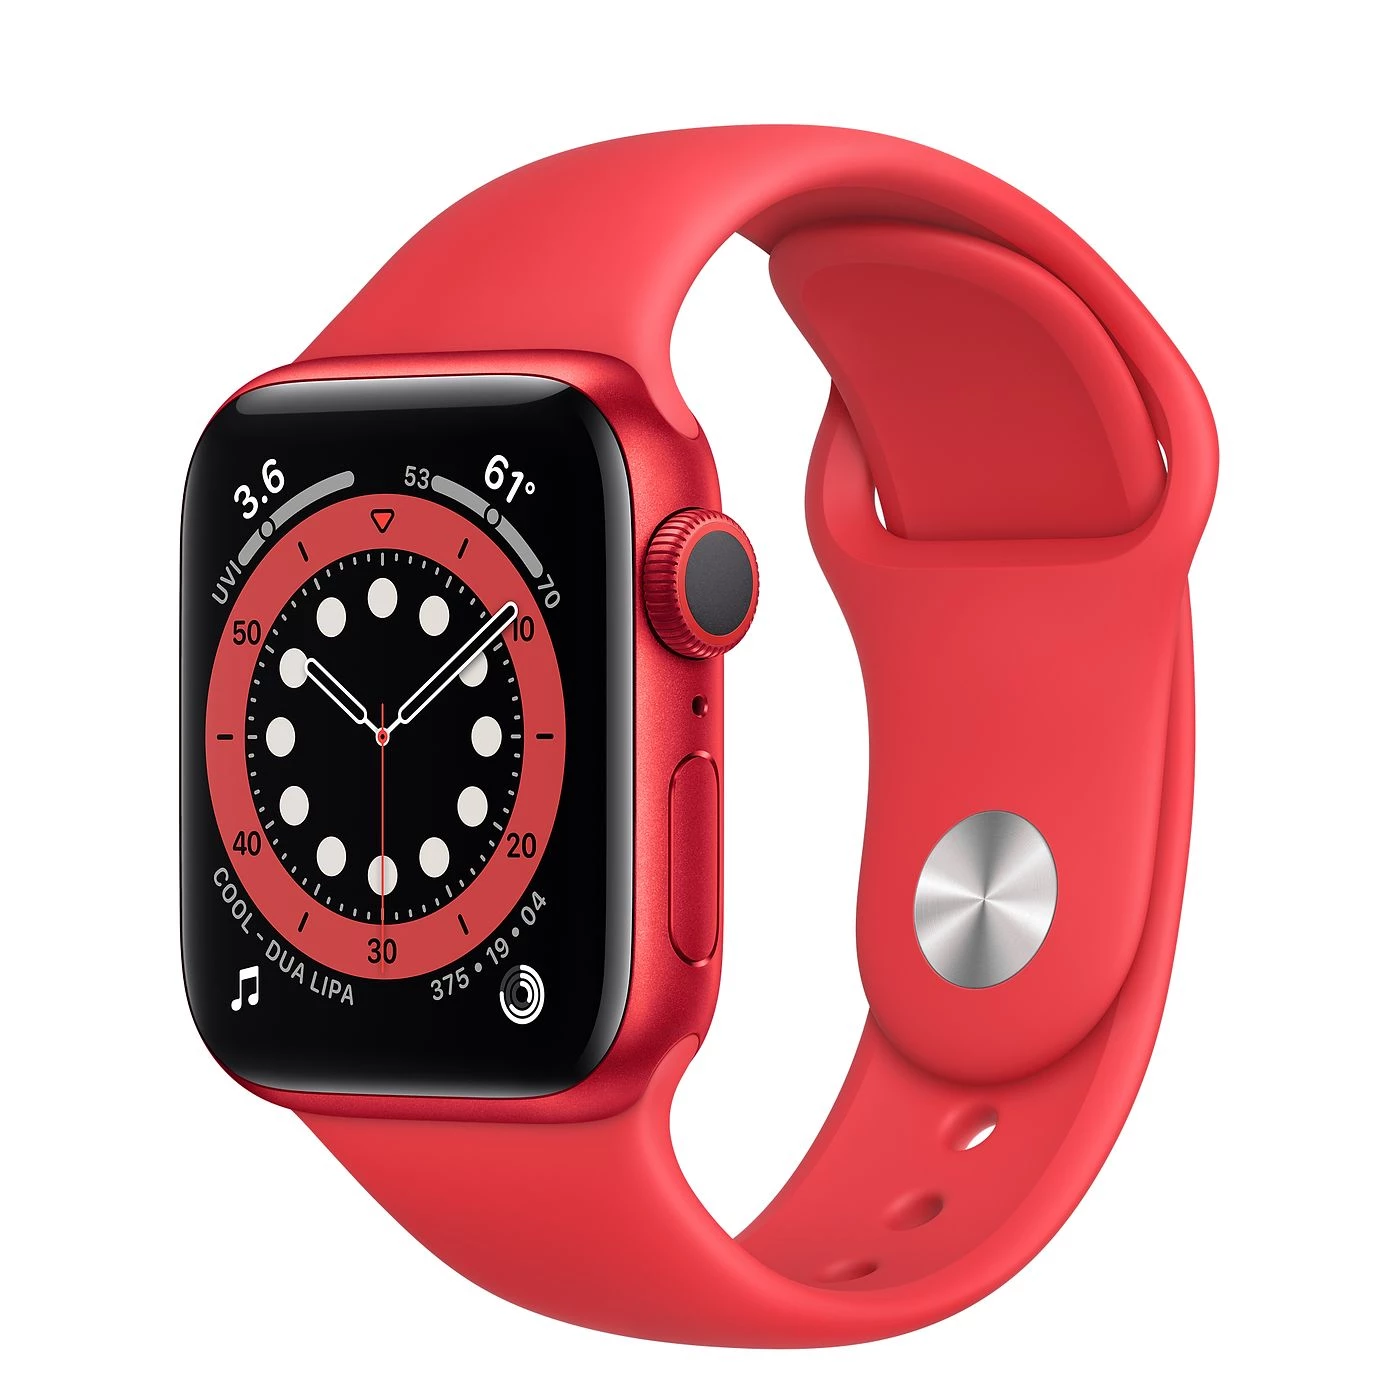 Apple Watch Series 6 GPS 40mm (PRODUCT)RED Aluminum Case with (PRODUCT)RED Sport Band (M00A3)